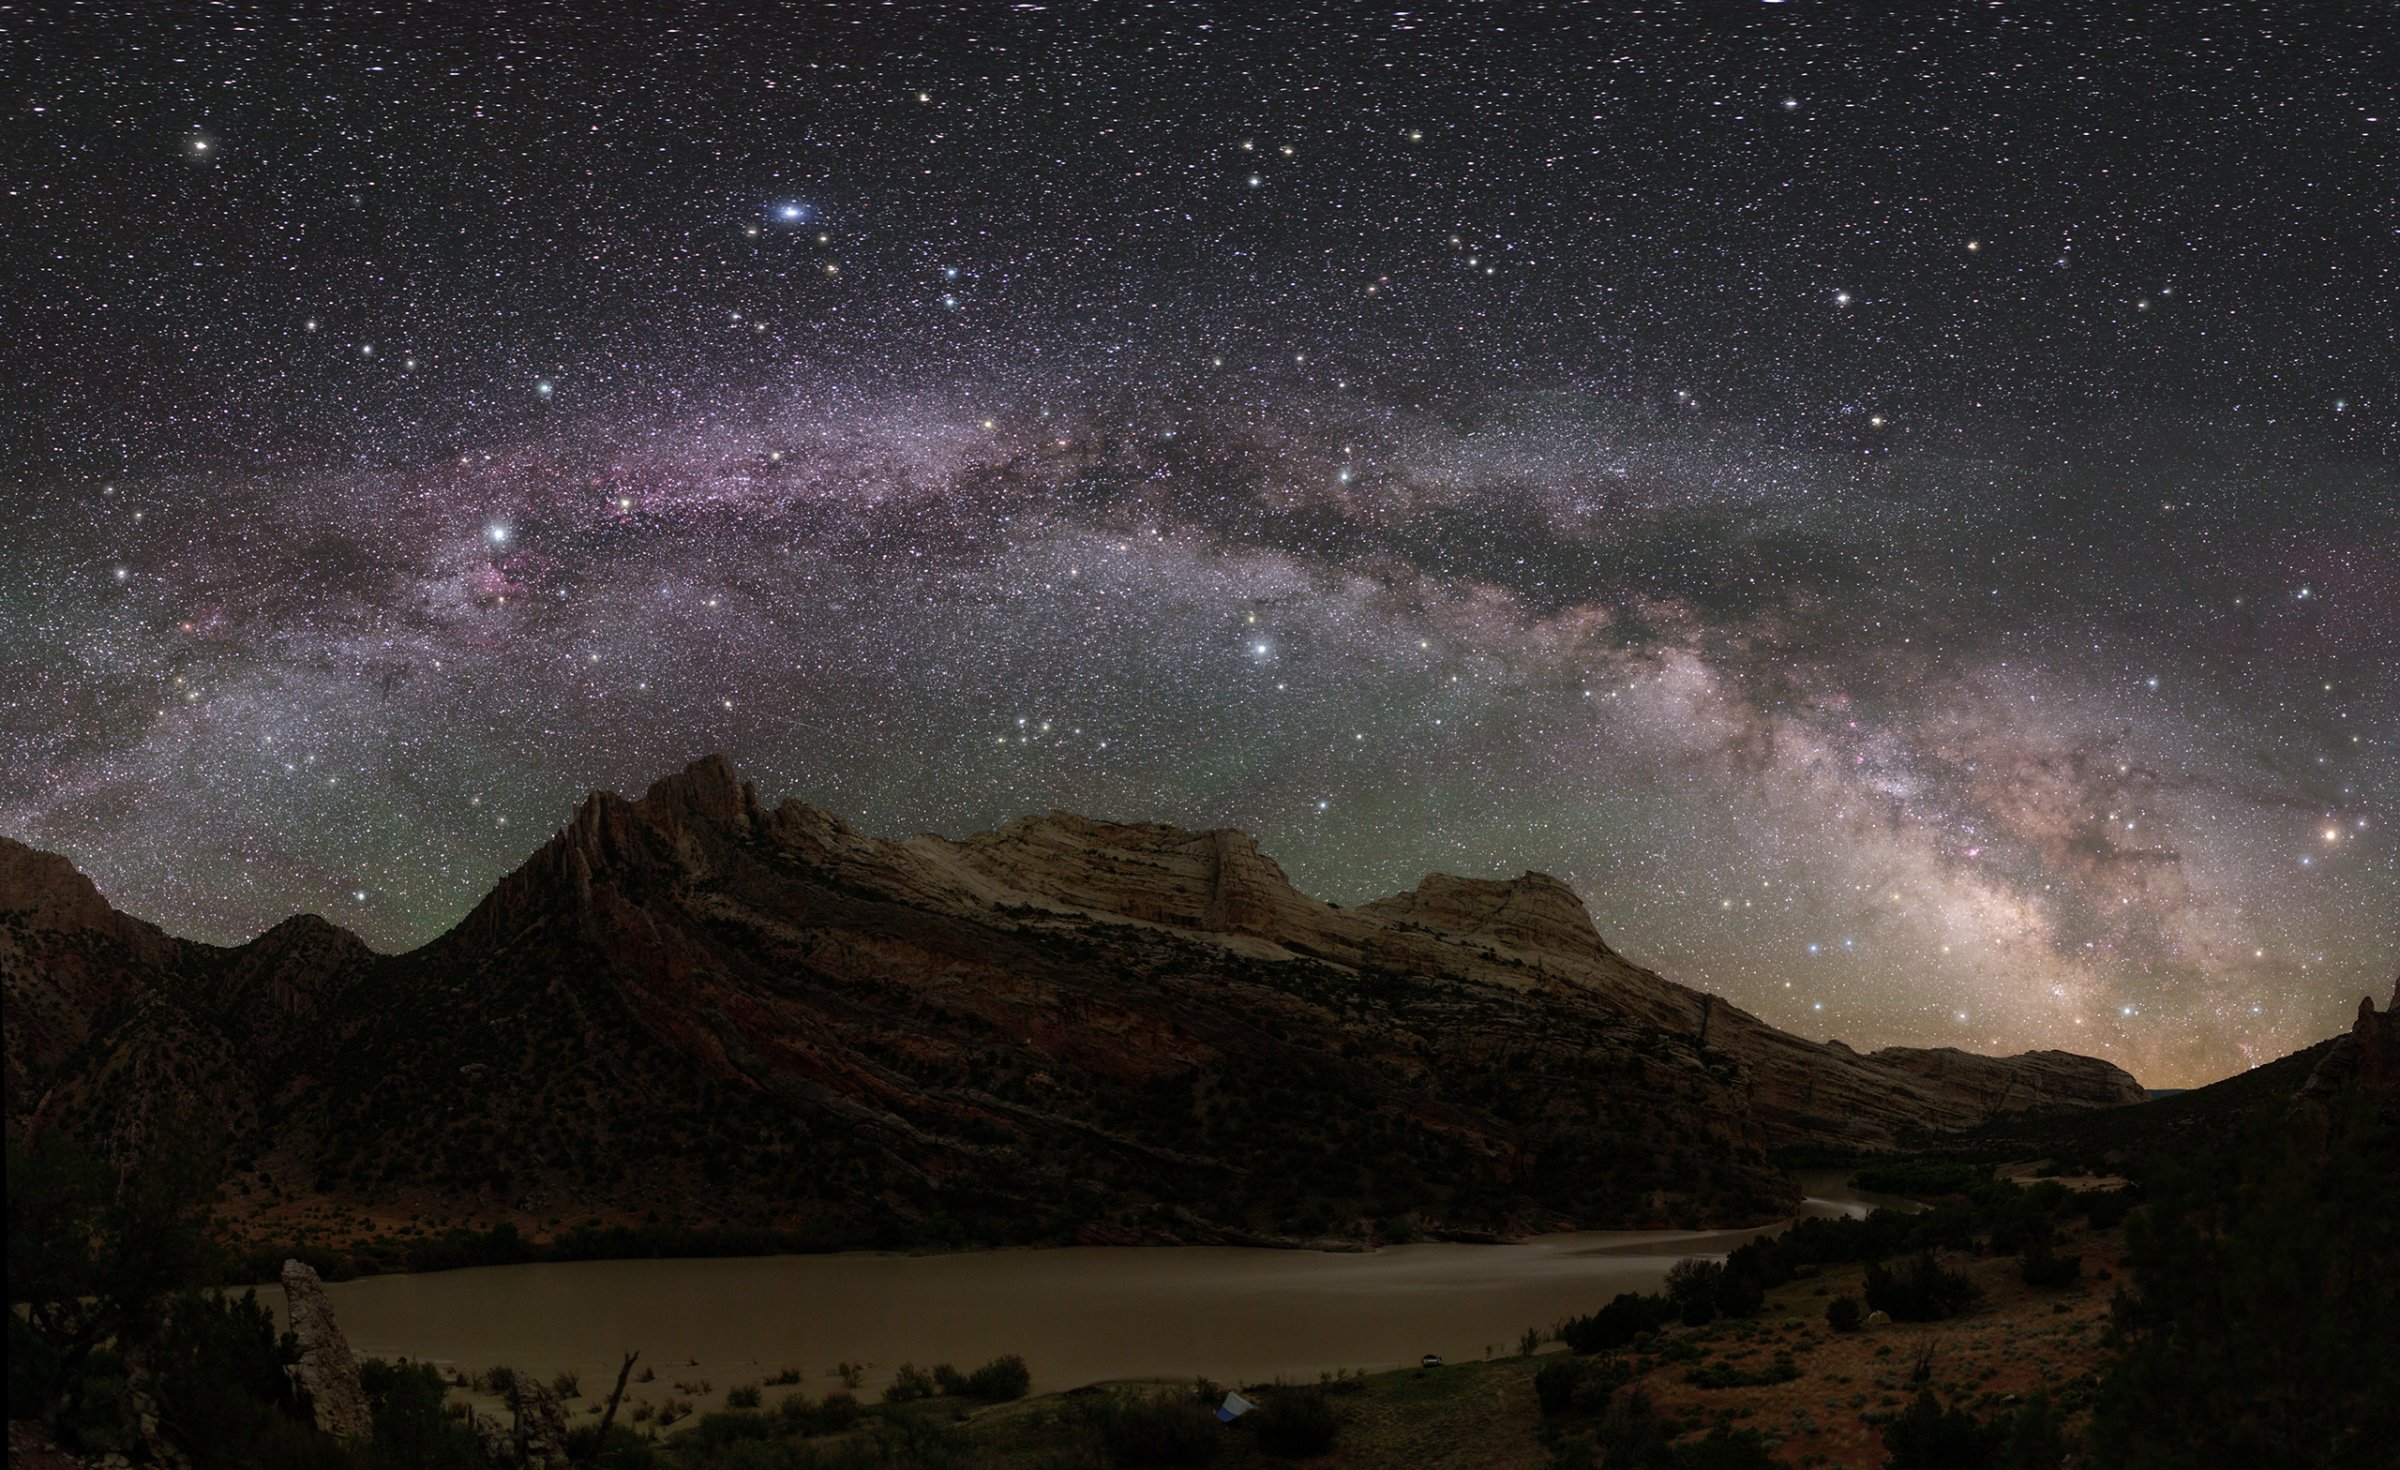 The Milky Way over Dinosaur National Park. Credit: Photo by Dan Duriscoe